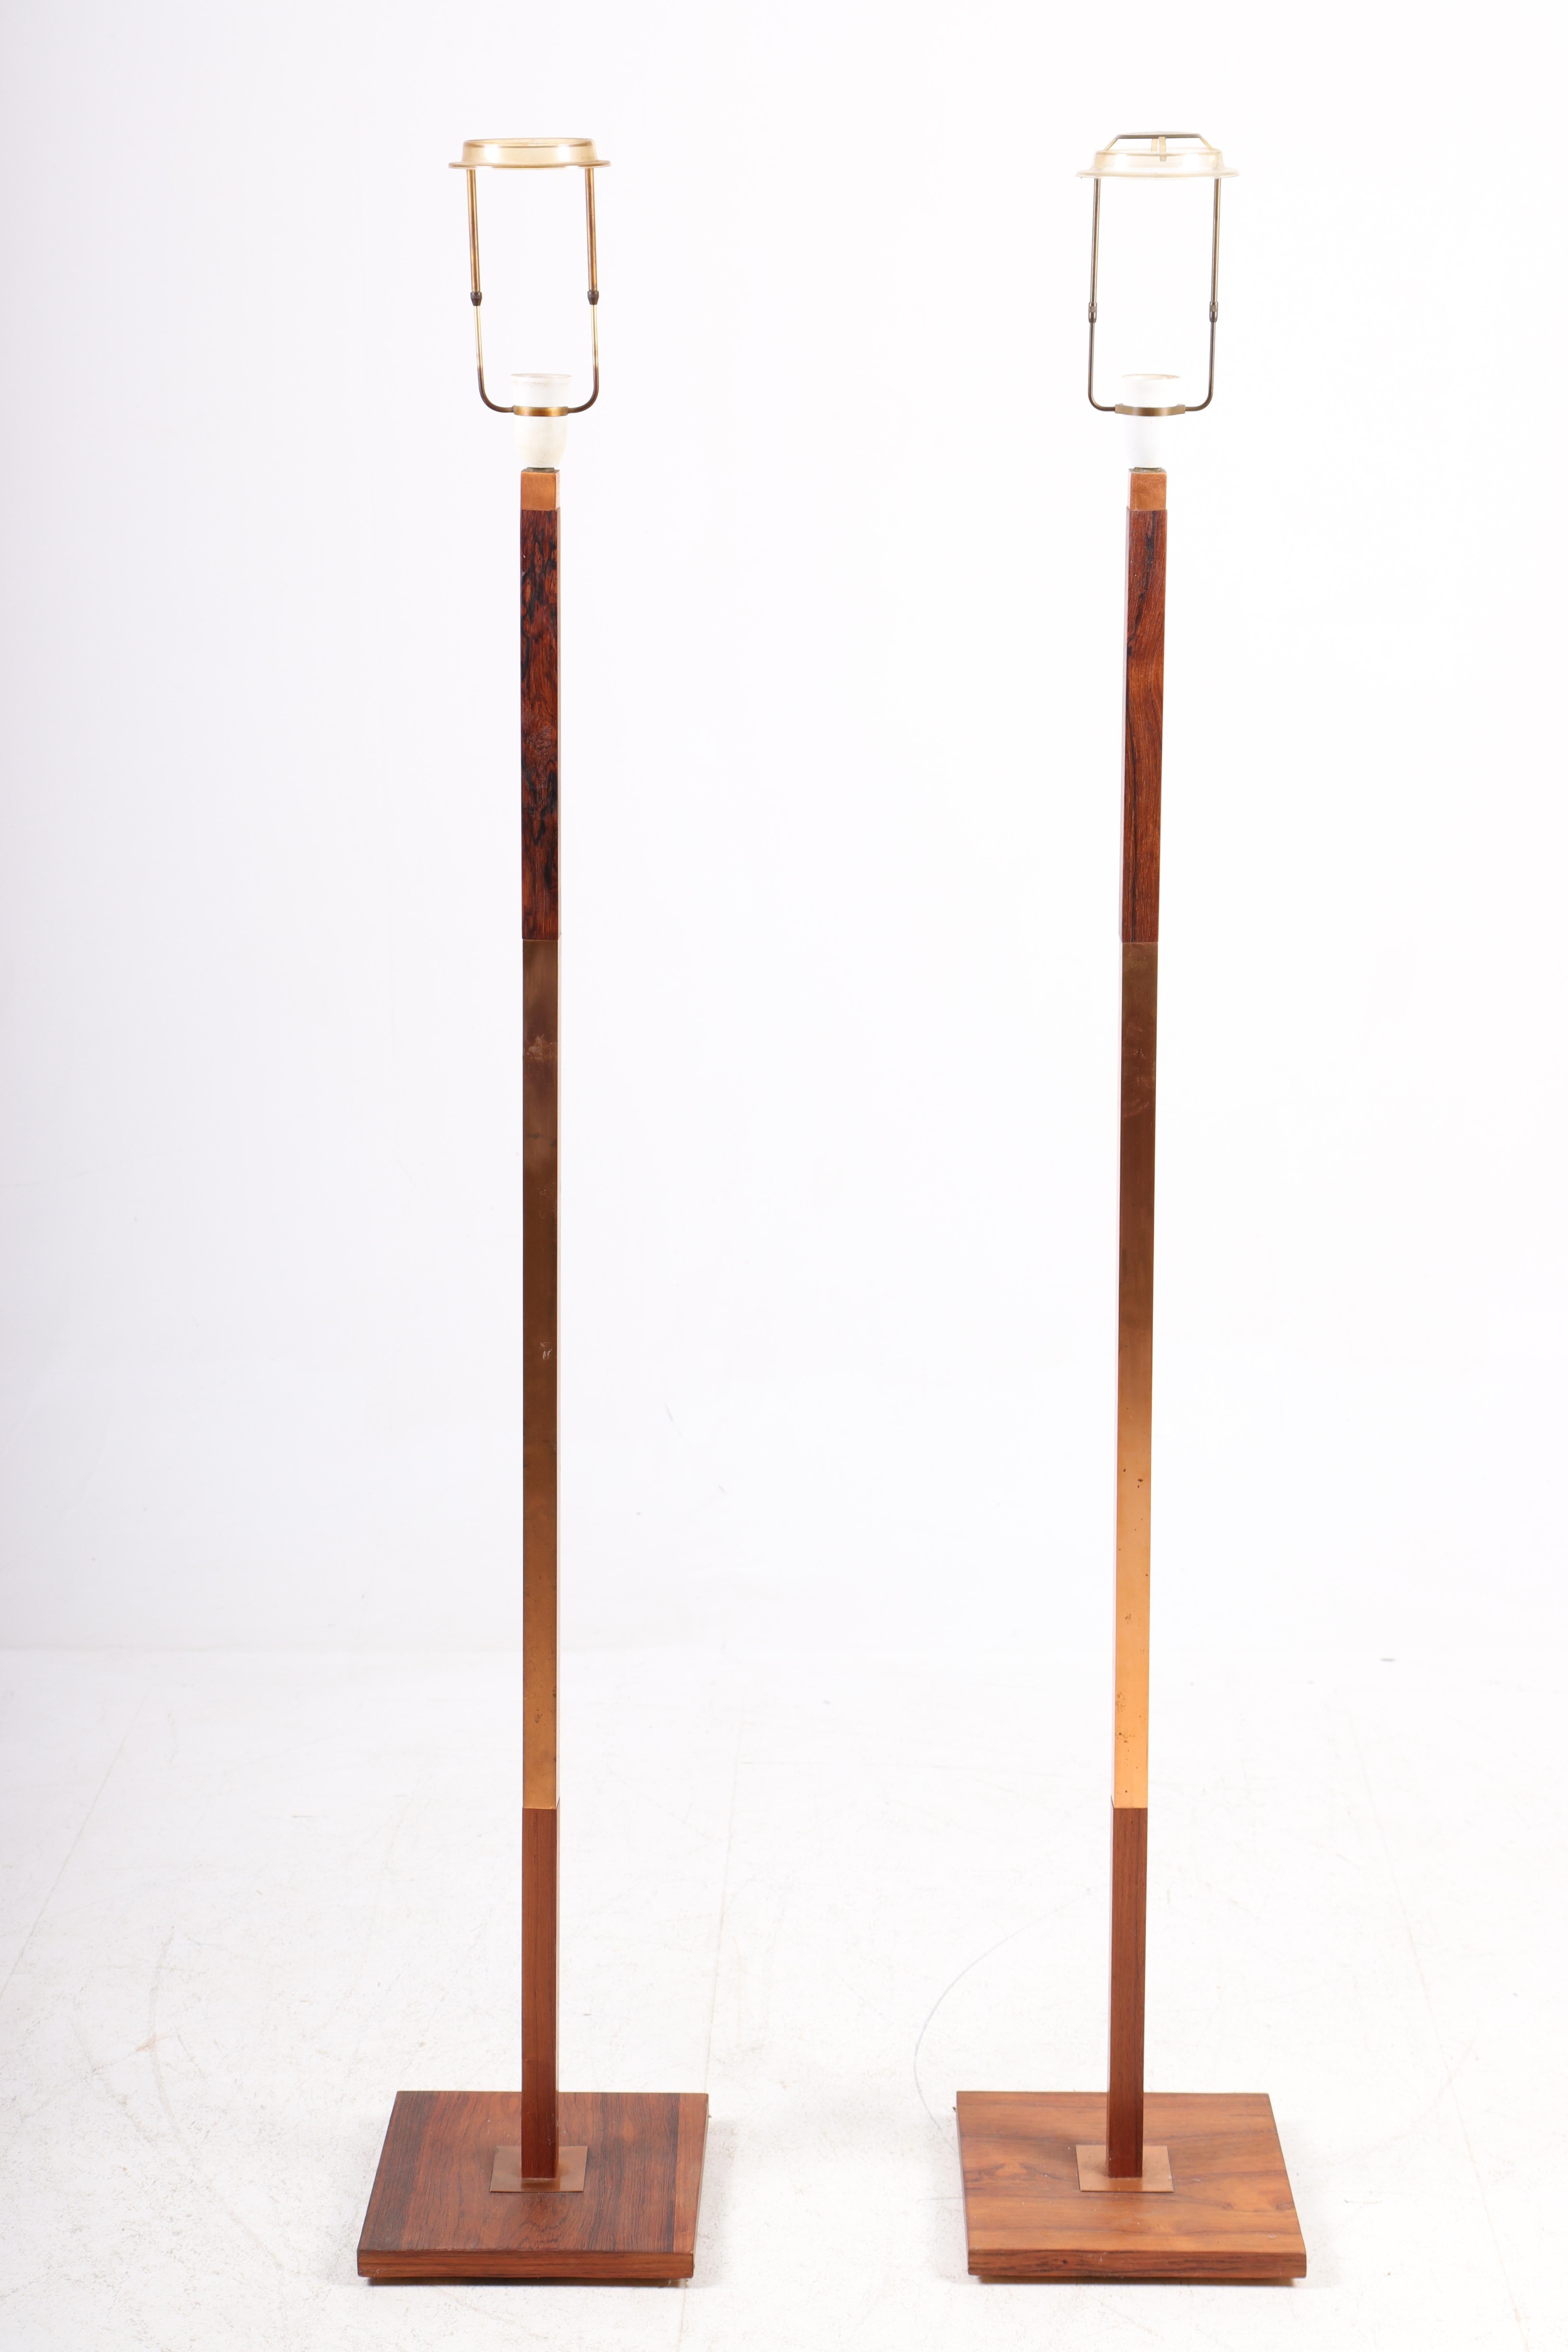 Pair of great looking floor lamps in rosewood and copper. Designed by Jo Hammerborg and made by Fog & Mørup in the mid-1950s. Great original condition.